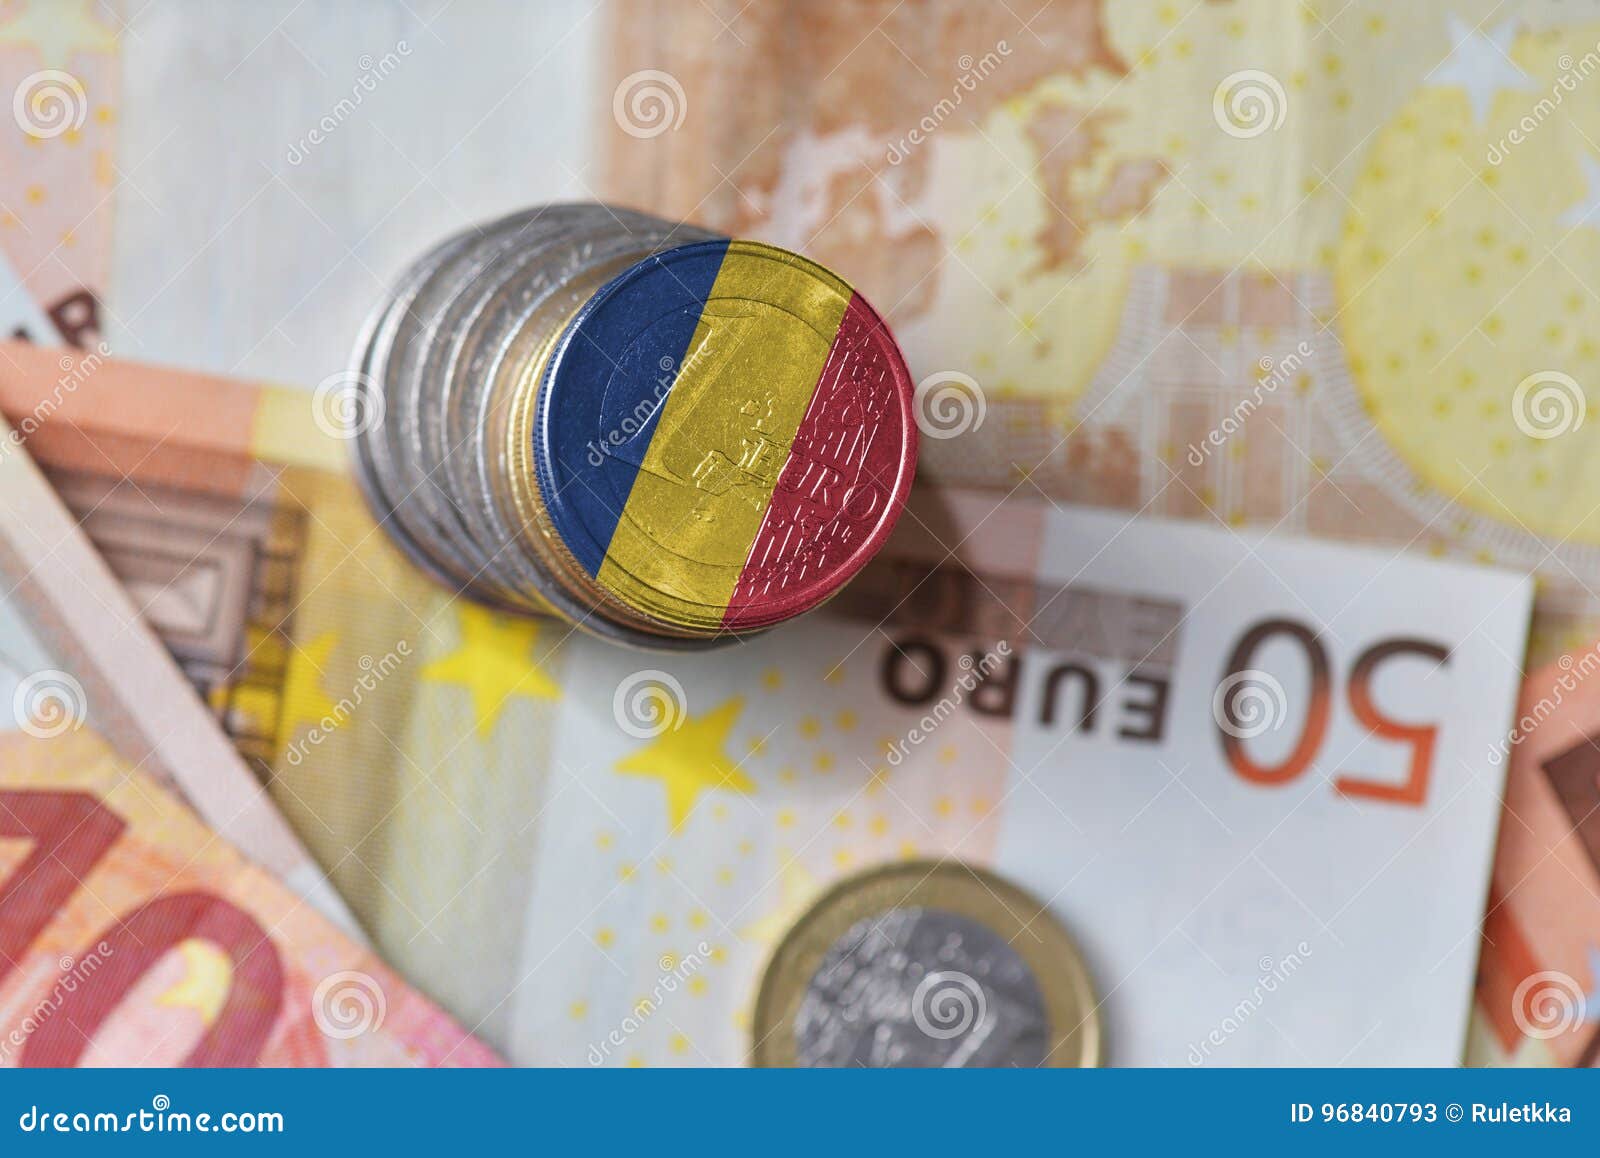 Euro Coin with National Flag of Romania on the Euro Money 